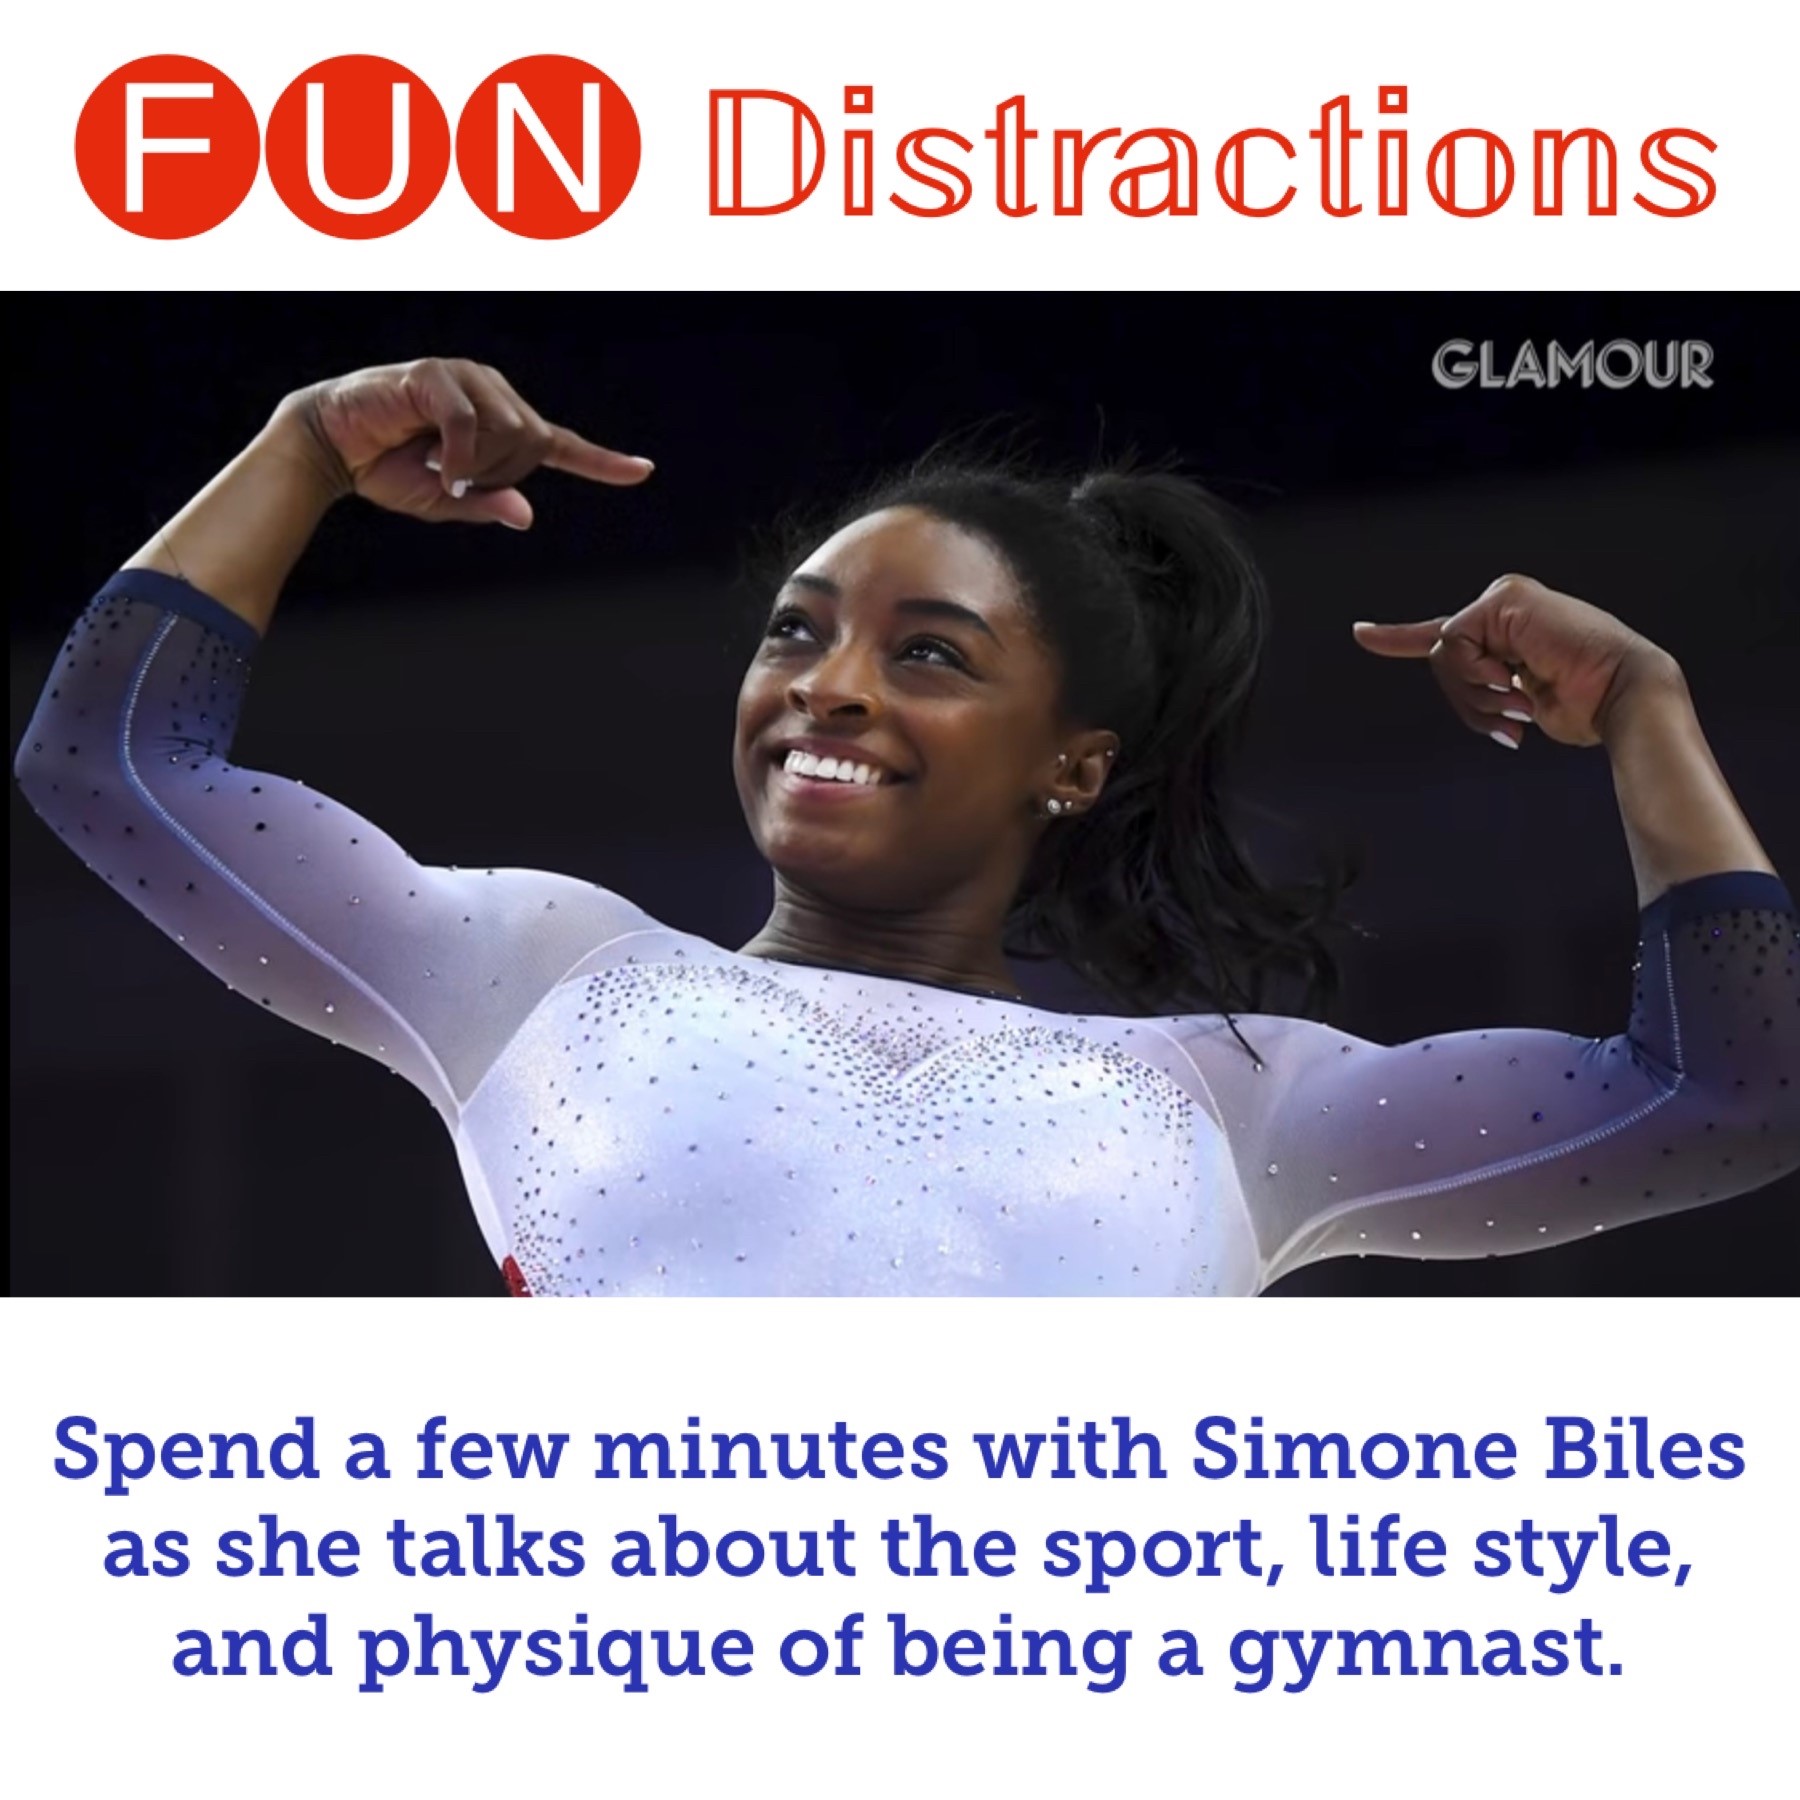  Image advertising the Library’s FUN Distractions series post about Simone Biles